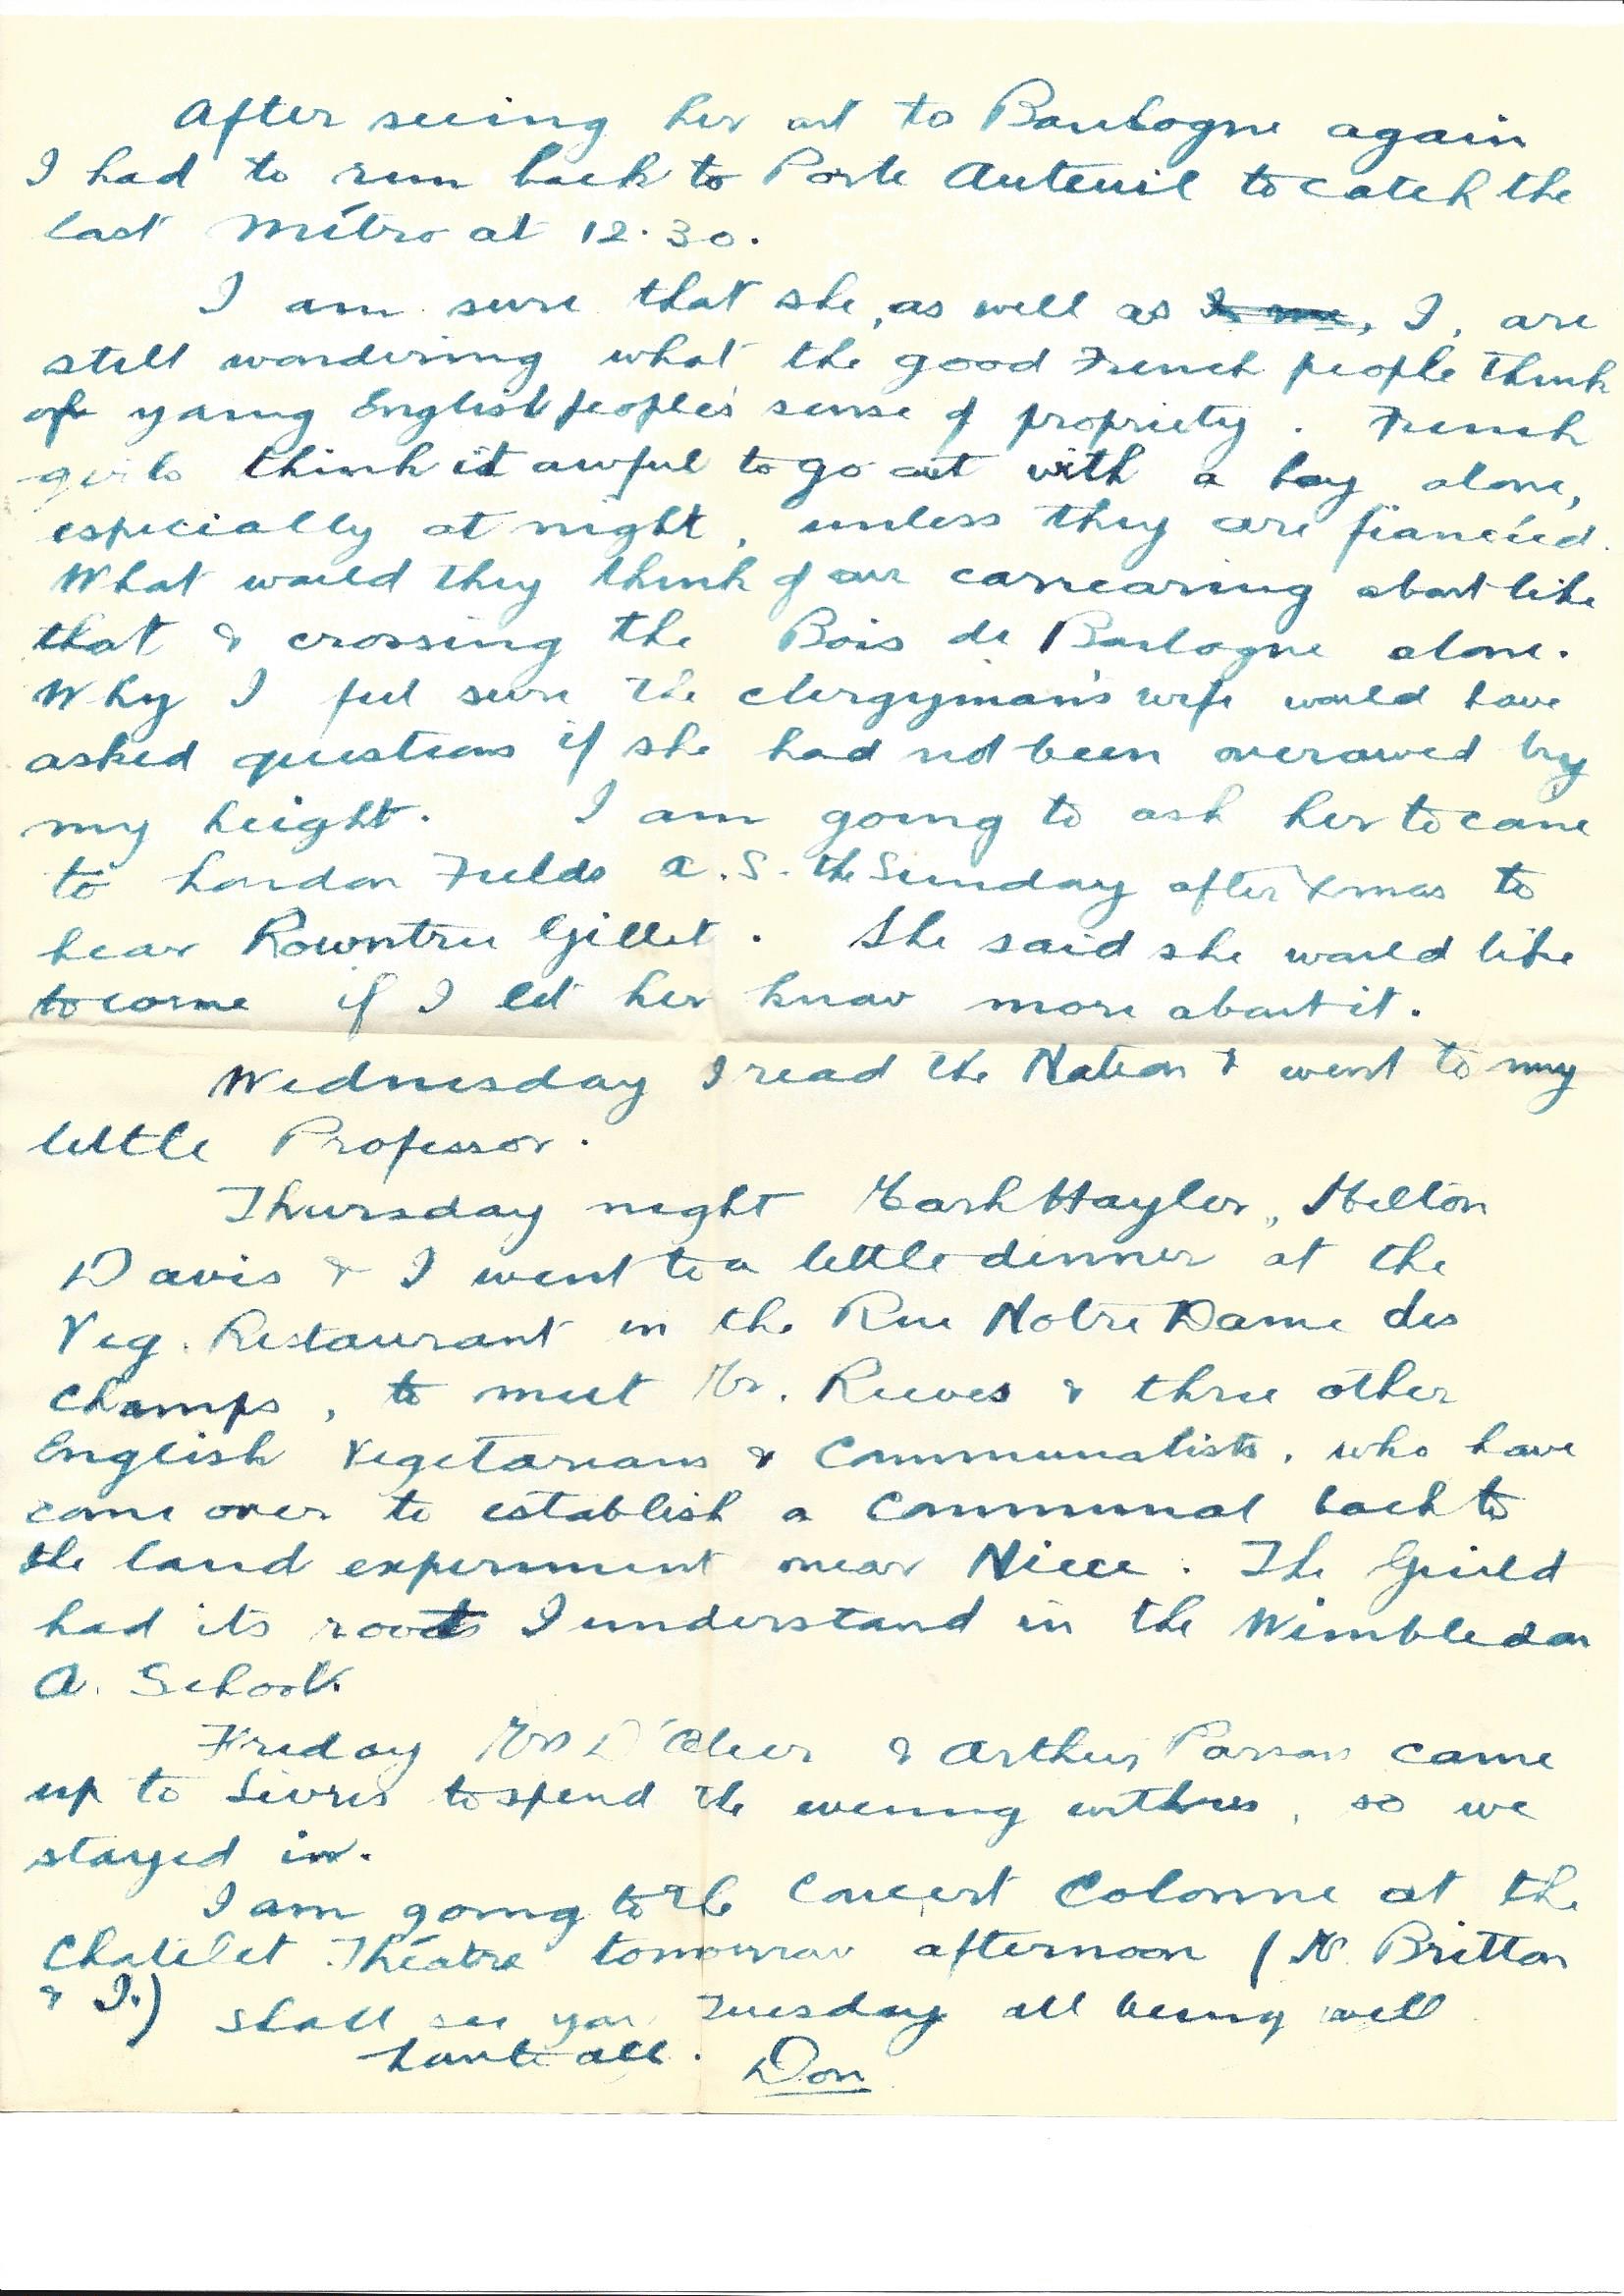 1919-12-20 page 3 letter by Donald Bearman